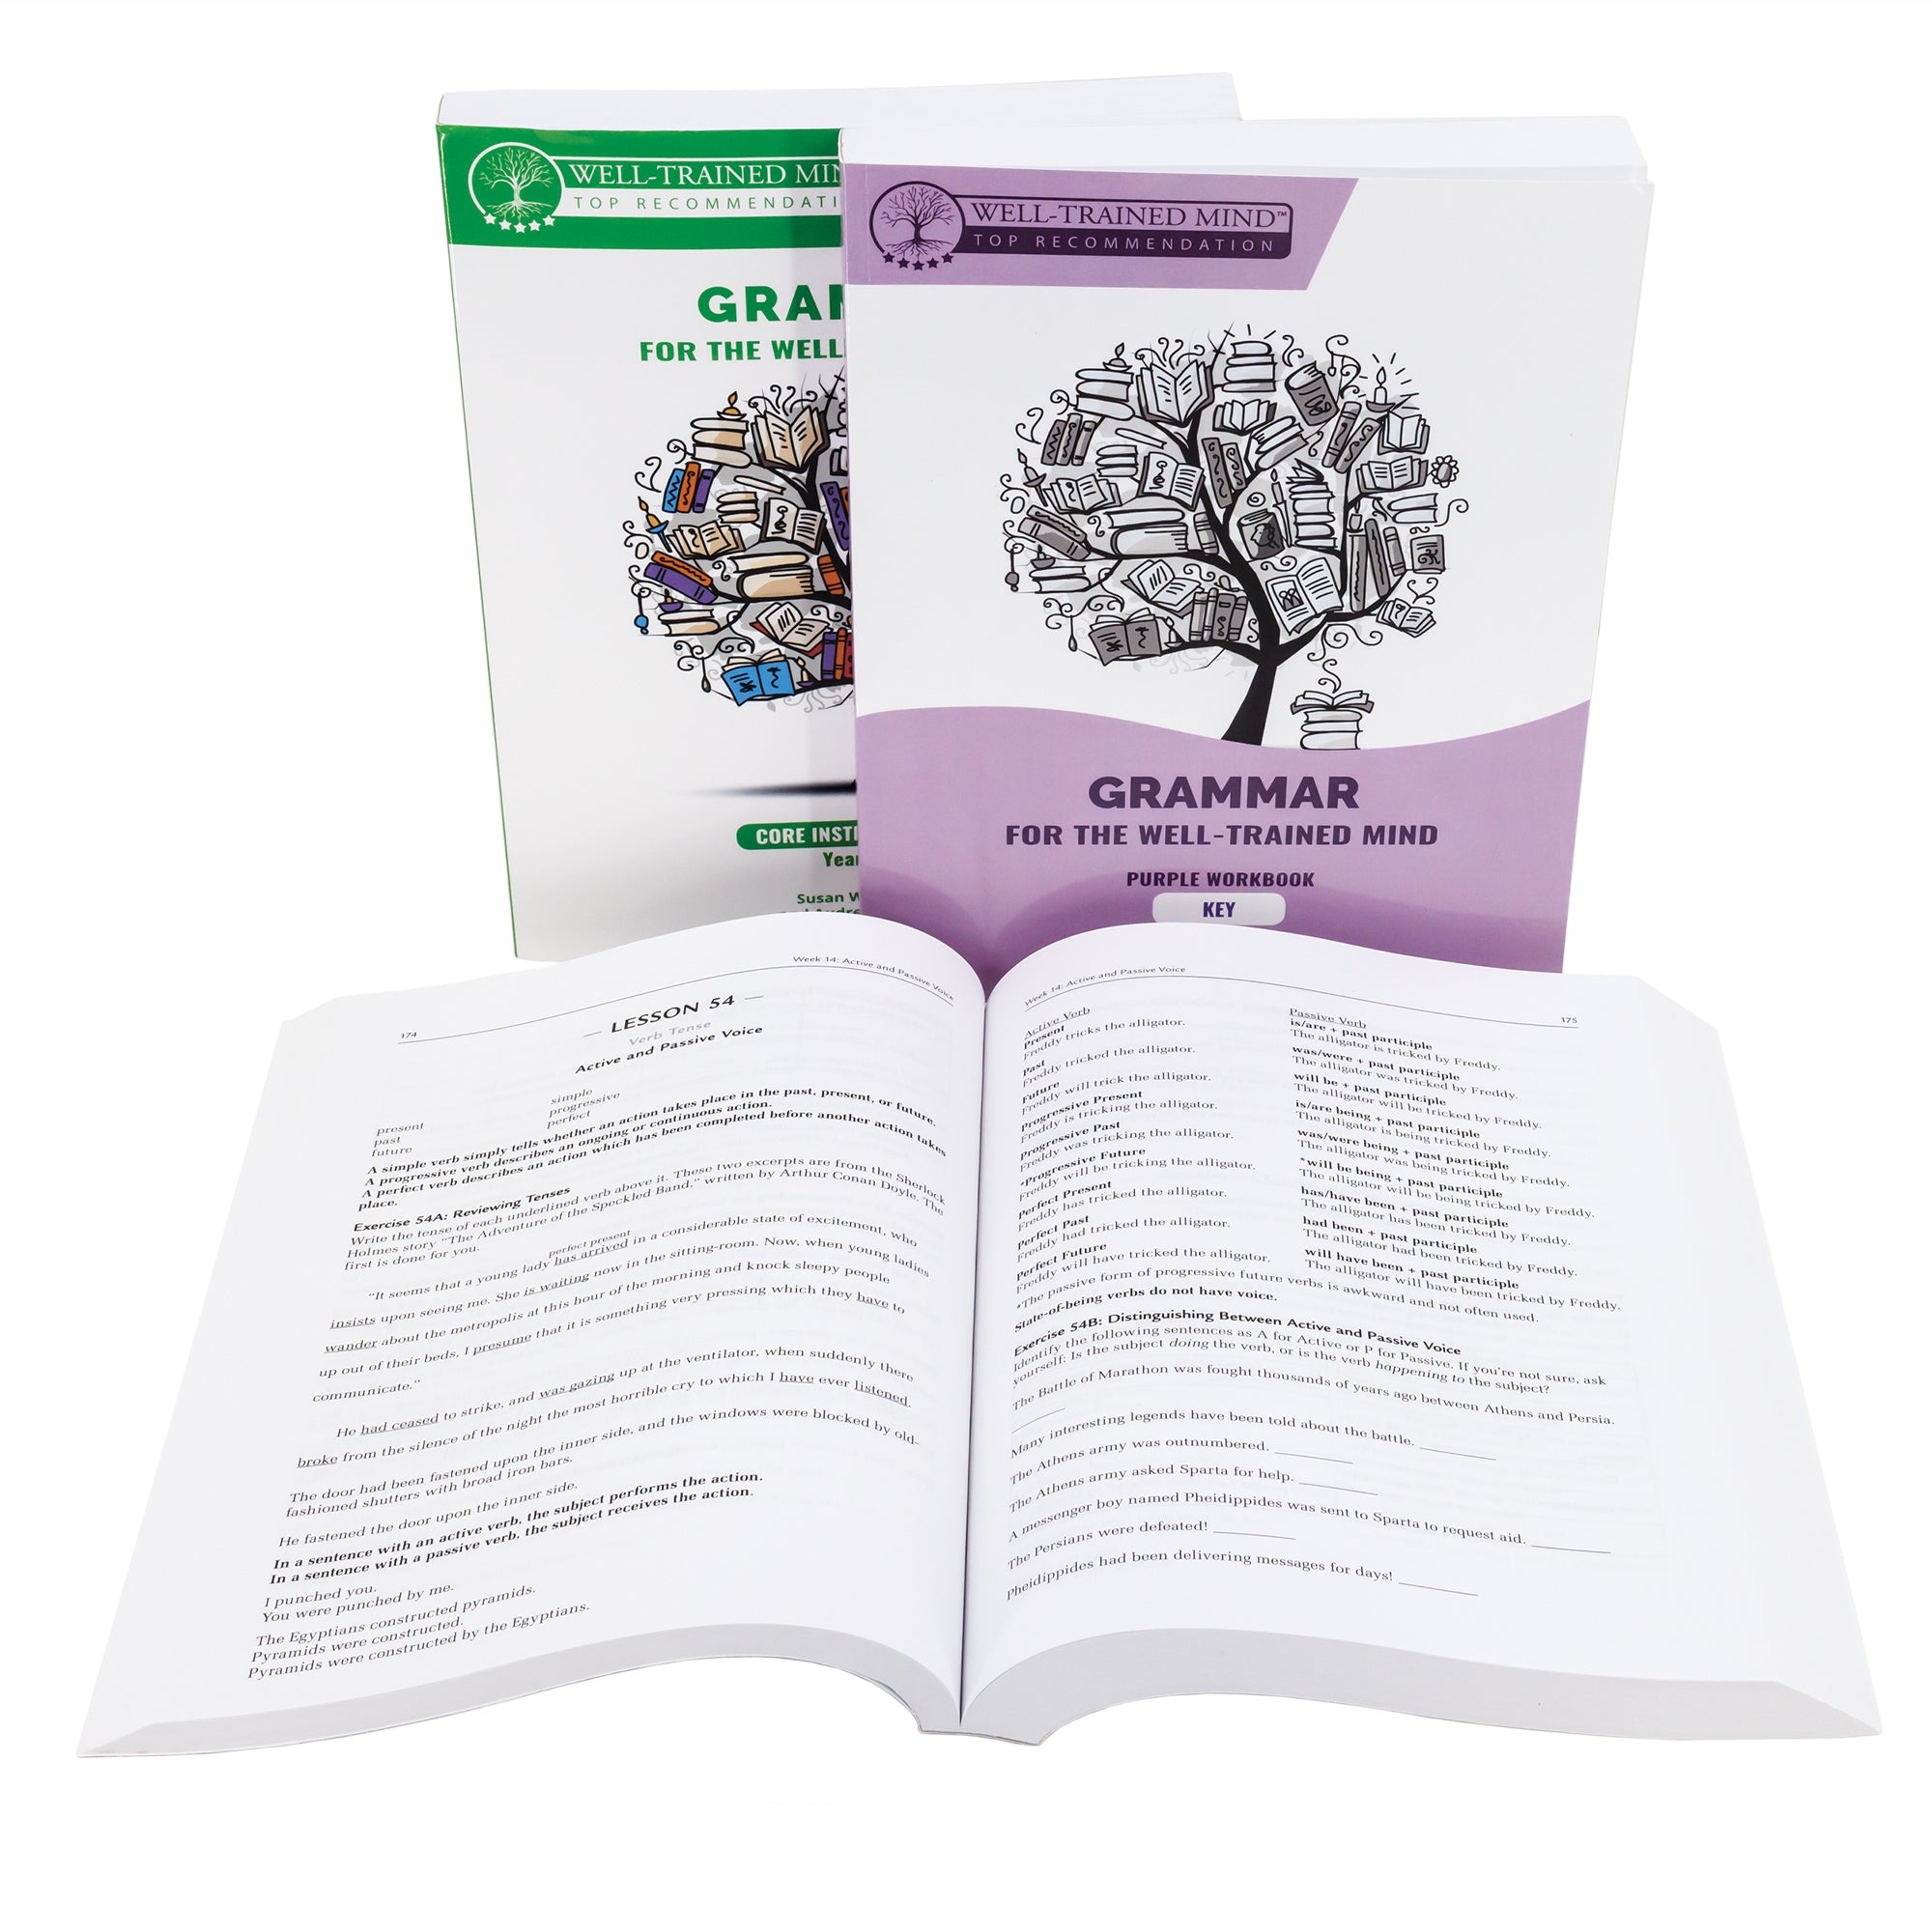 Grammar for the Well-Trained Mind Purple bundle of 3 books. There are 2 books standing in the back and one book laid open in front of them, showing a review of lesson 54. The standing right book has a white top and purple bottom with a wave shape between the 2 colors. There is an illustration in the white section of a tree with books for leaves and a stack of books near the trunk. The title is in the purple section at the bottom. Tucked behind the pink book is a green version of the book.